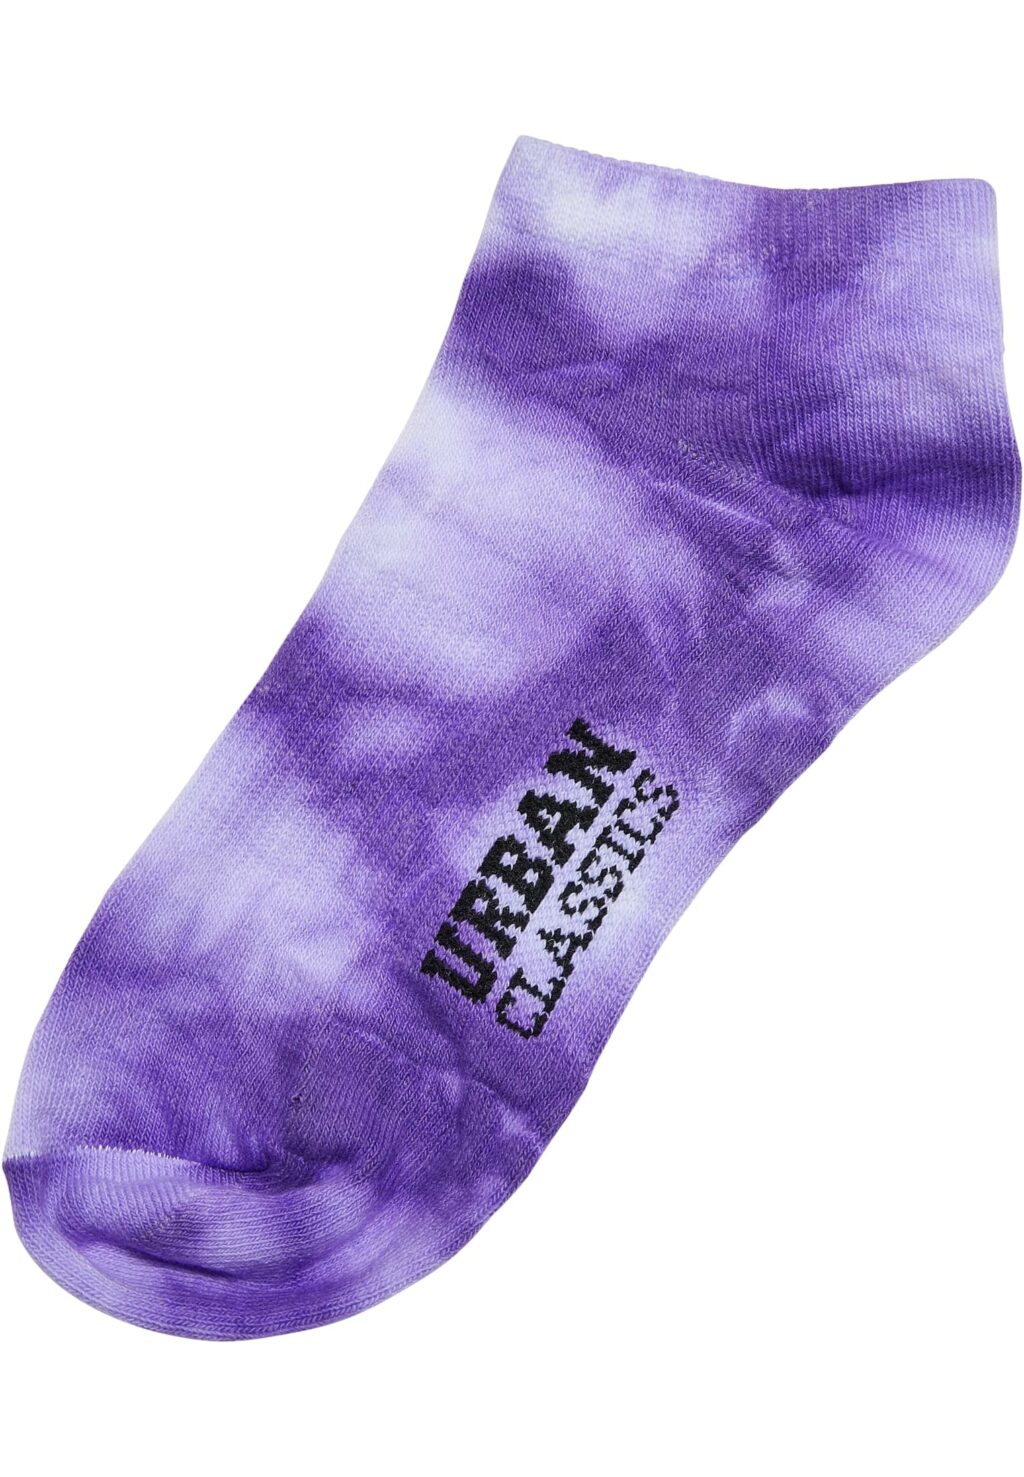 Tie Dye Invisible Socks 5-Pack multicolor TB5200